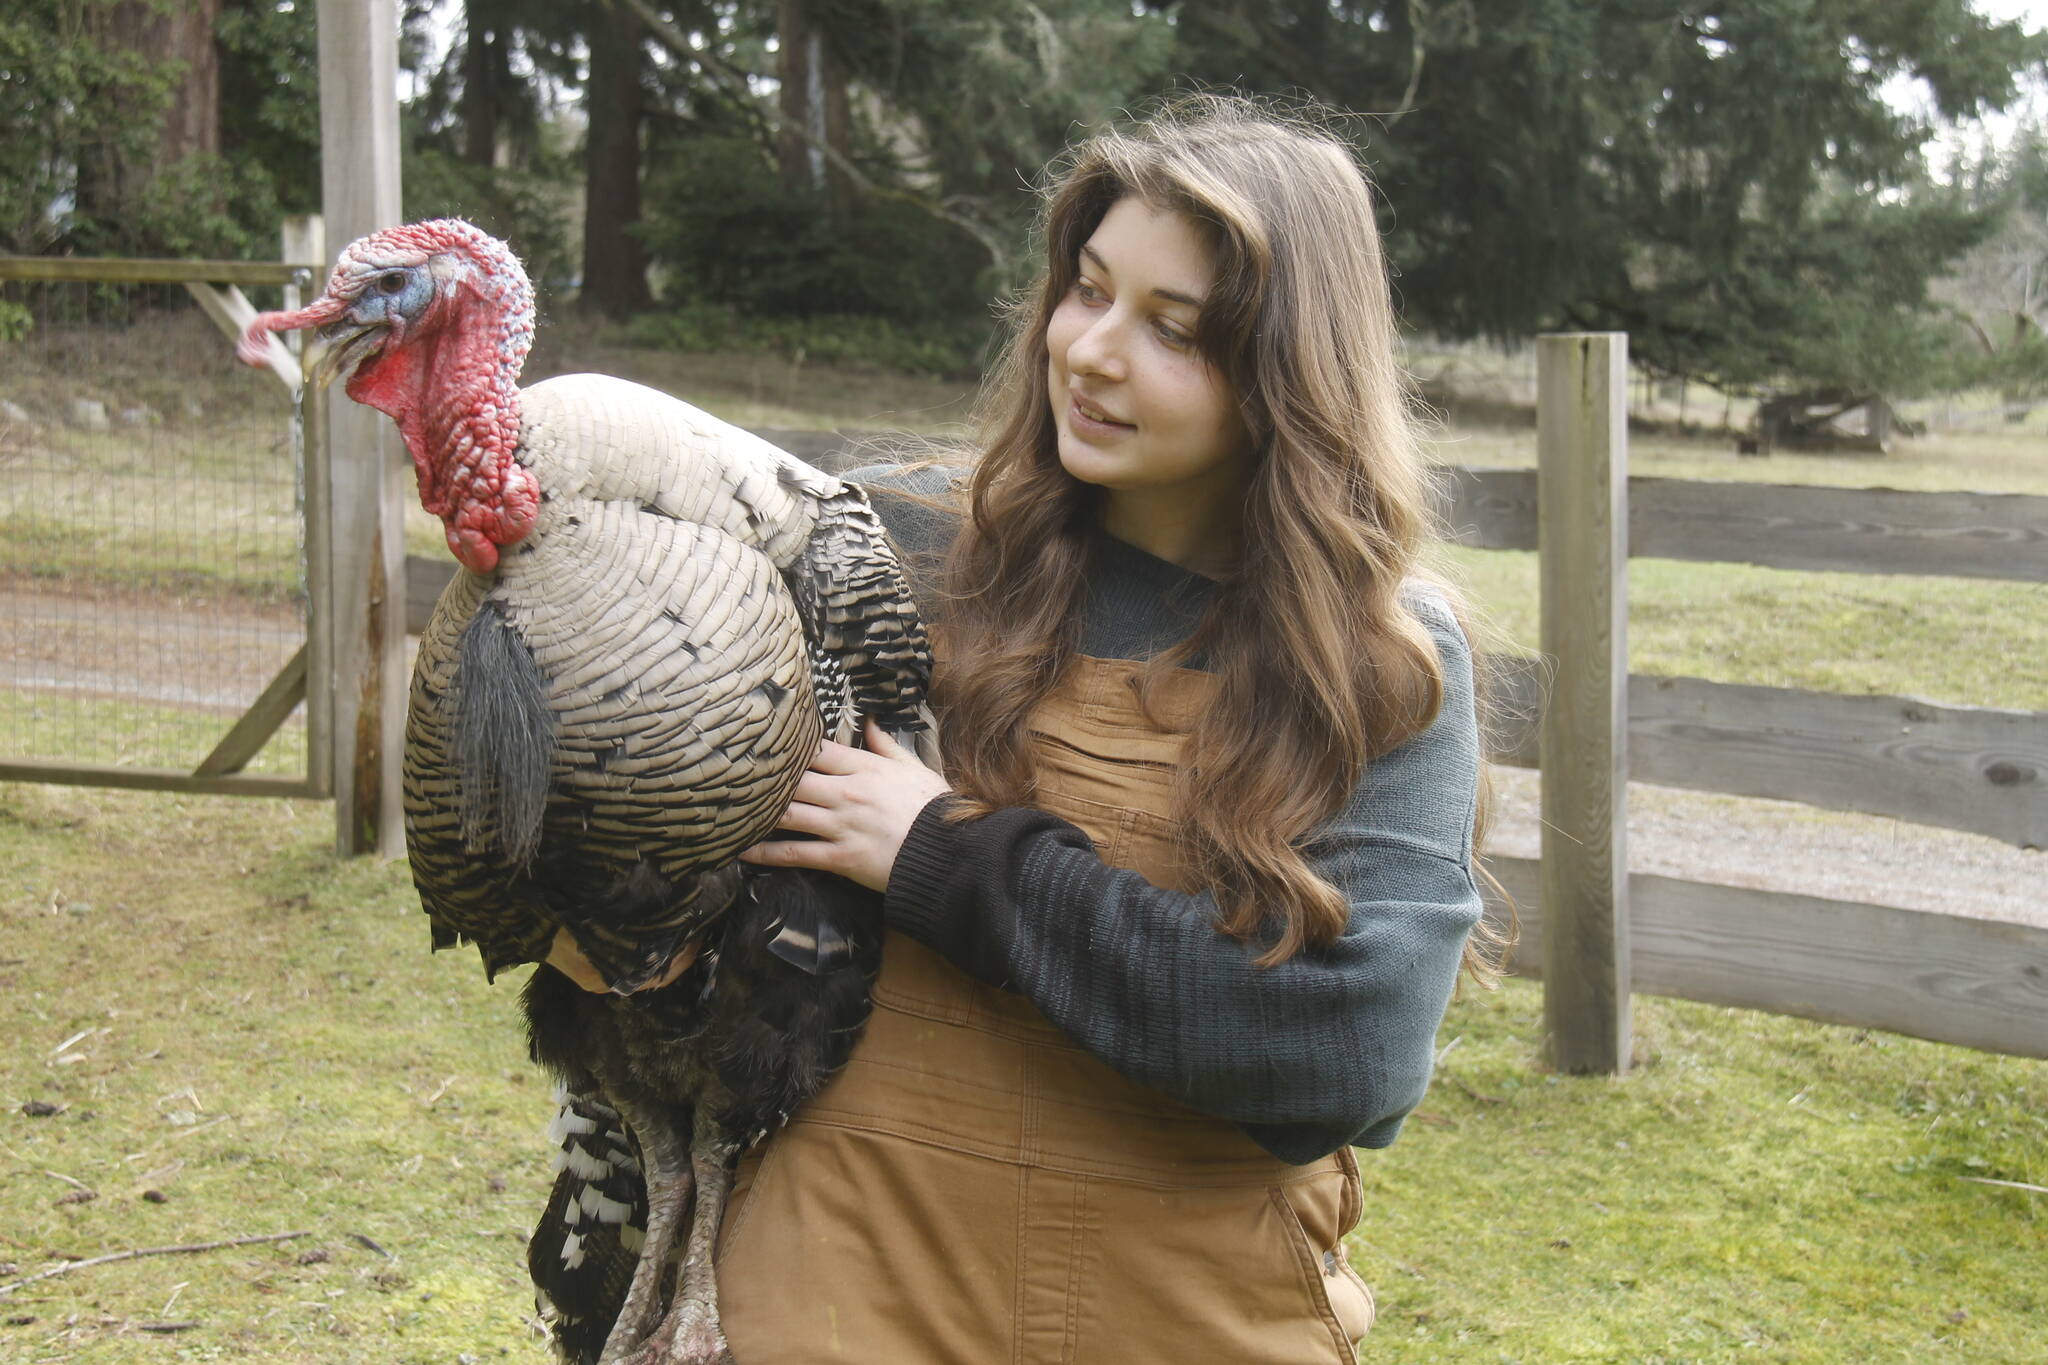 Heather Talley, illustrator of “Thankful Harvest,” holds a turkey at Sweetwater Farm. (Photo by Kira Erickson/South Whidbey Record)